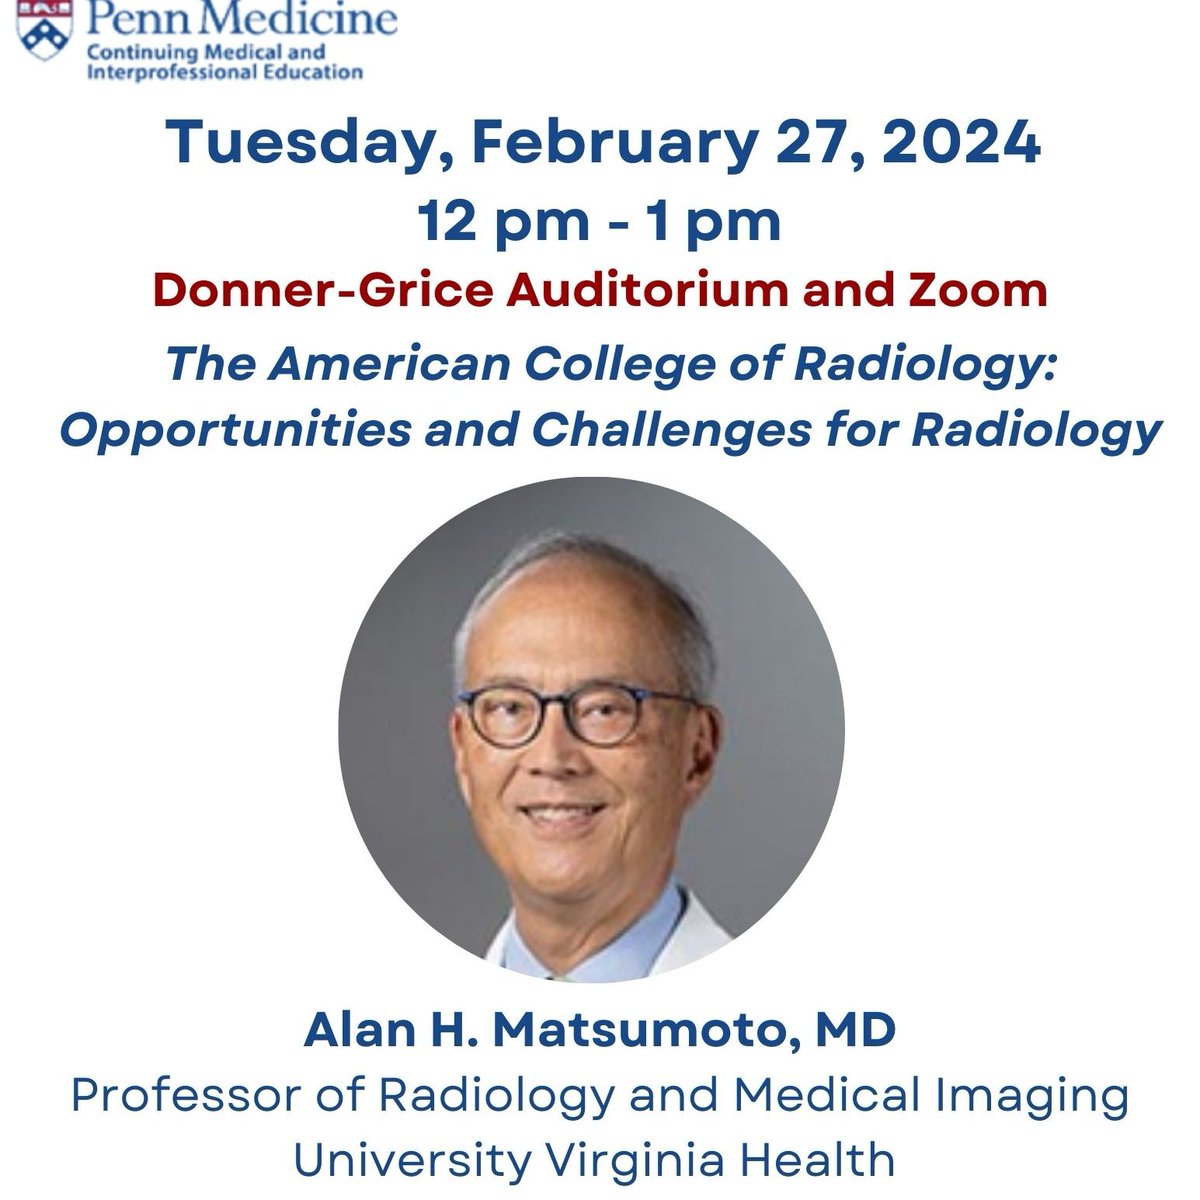 Check it out‼️ @AlanMatsumotoMD will be here next week presenting Radiology Grand Rounds. You won't want to miss this!